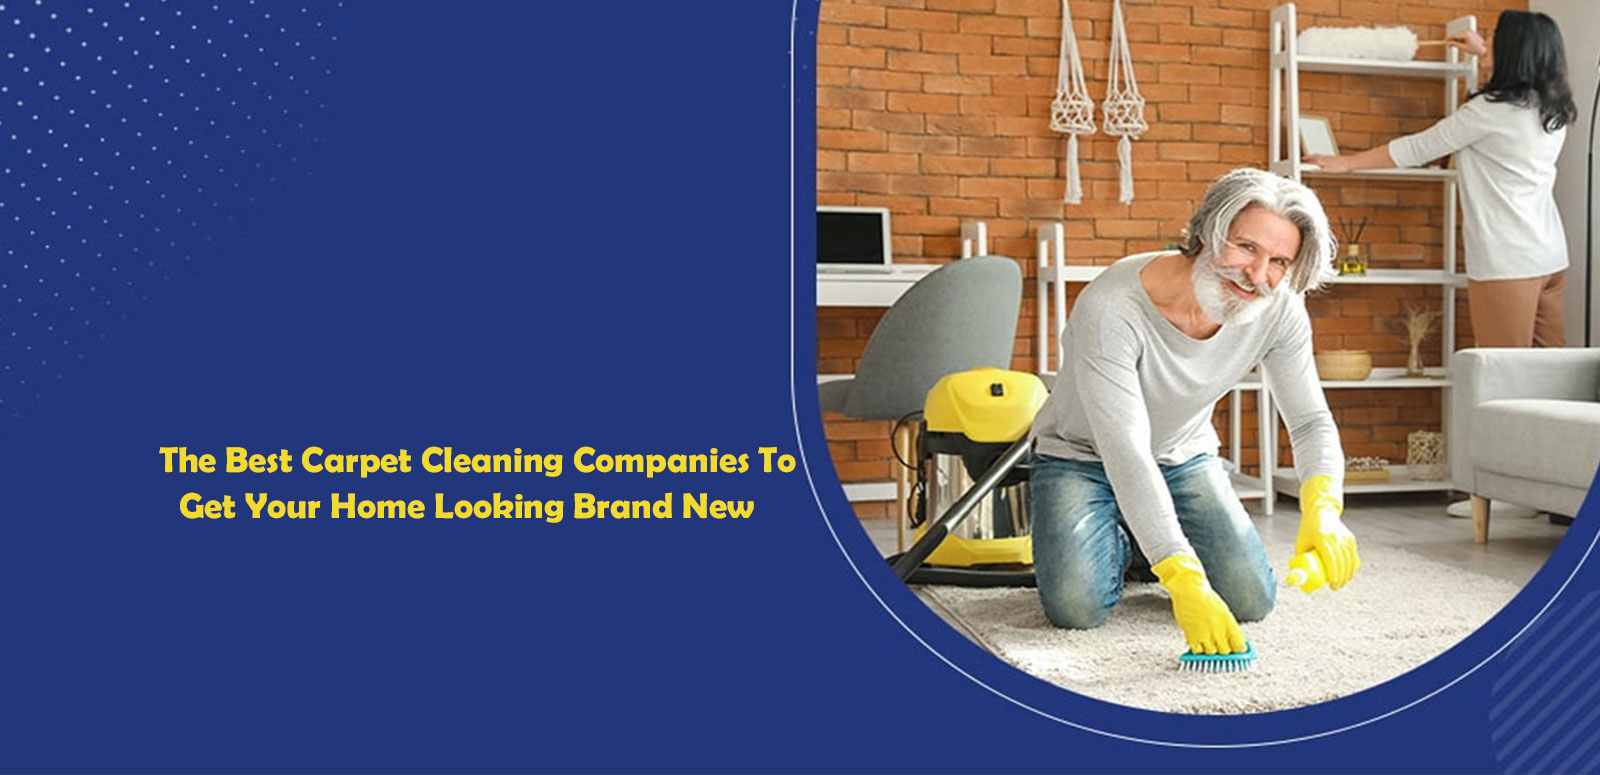 The Best Carpet Cleaning Companies To Get Your Home Looking Brand New